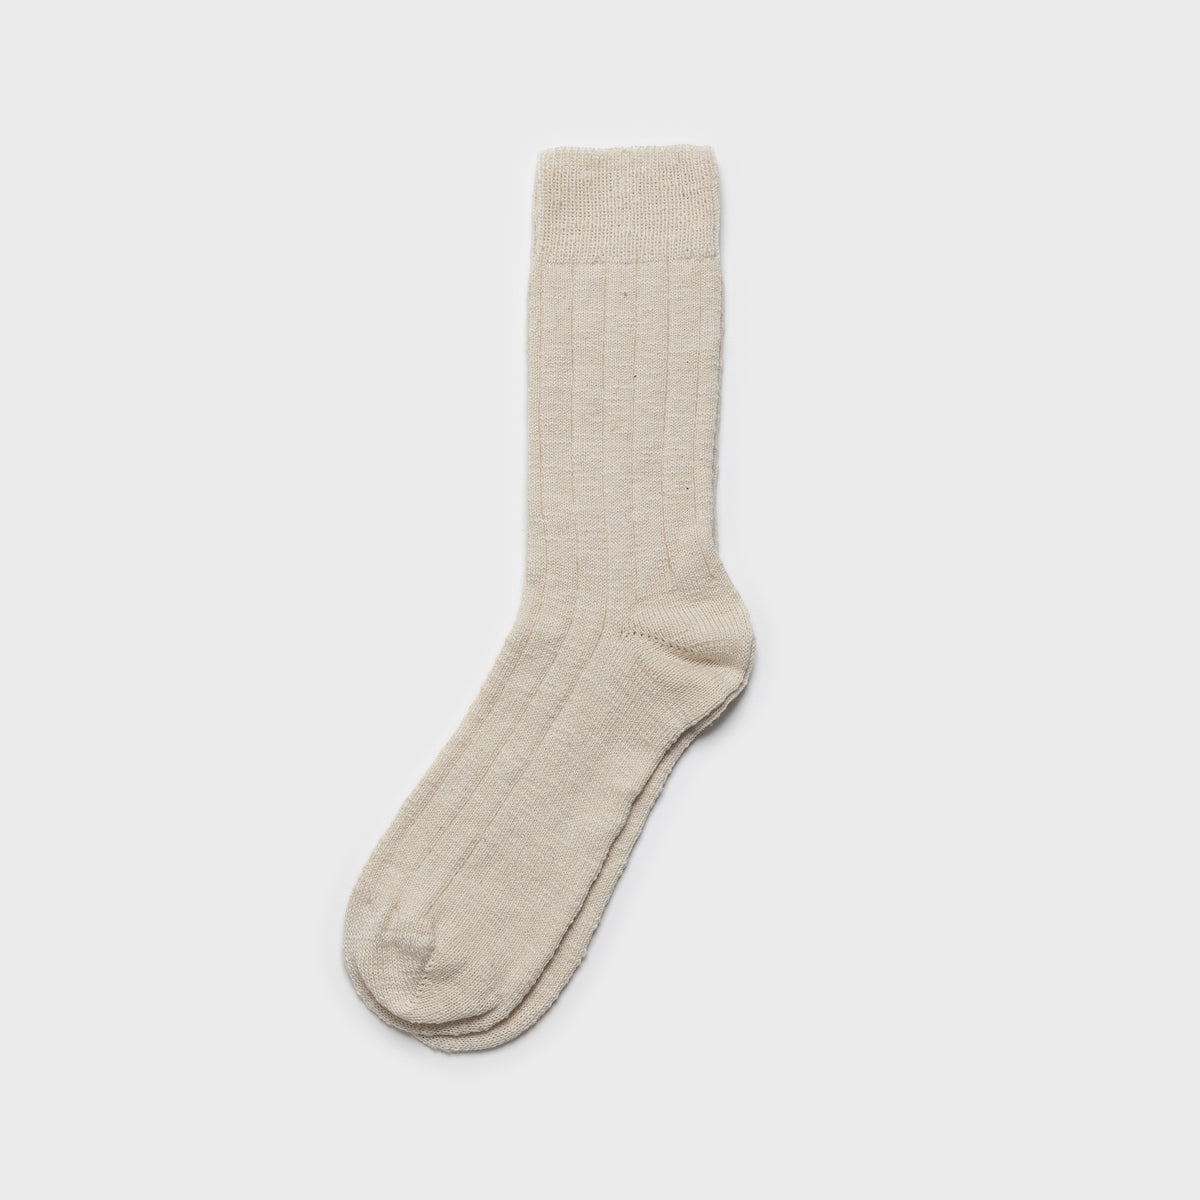 Flammé socks Off White knitted in Portugal from a cotton blend - Front Women - Front Men